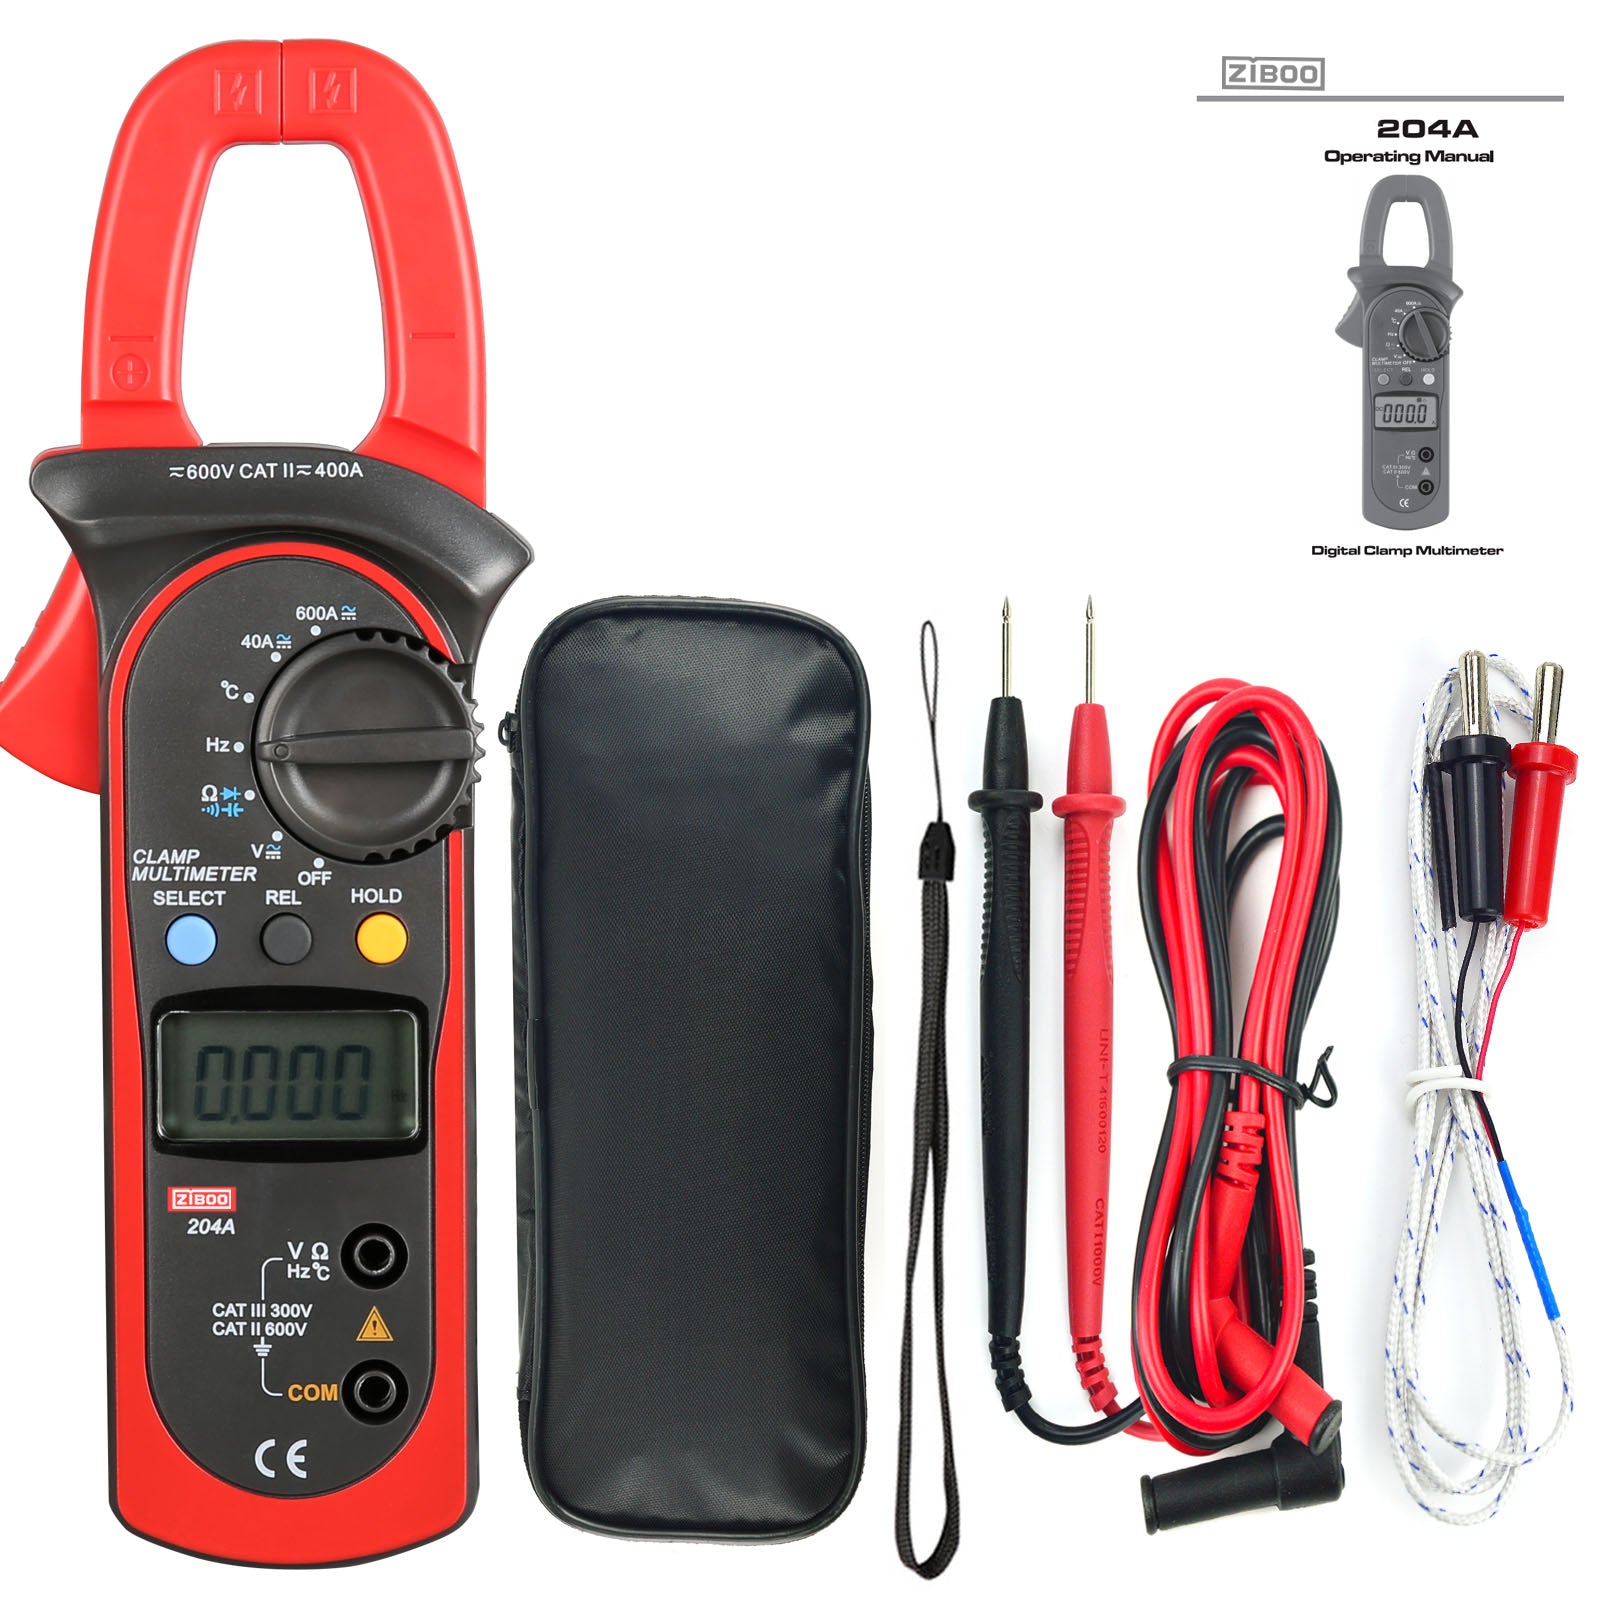 ZIBOO 202+ 400-600A Digital Clamp Meter,Air Conditioning